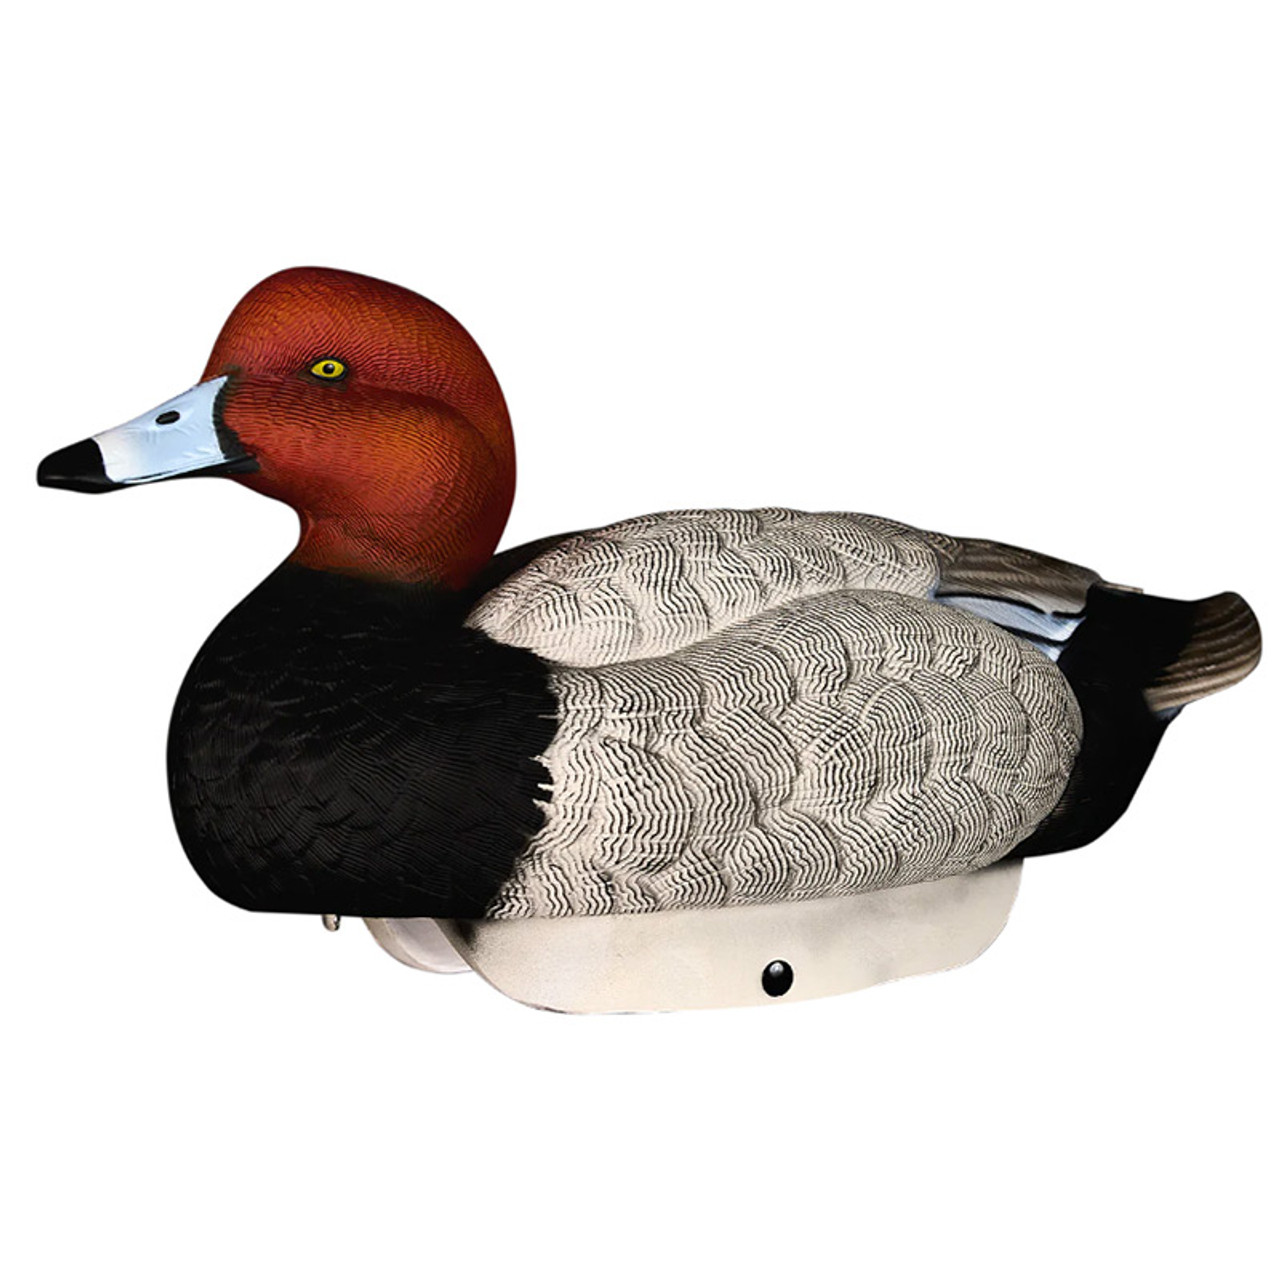 Active Drake - HydroFoam Redheads 6-Pack Duck Decoys by Heyday